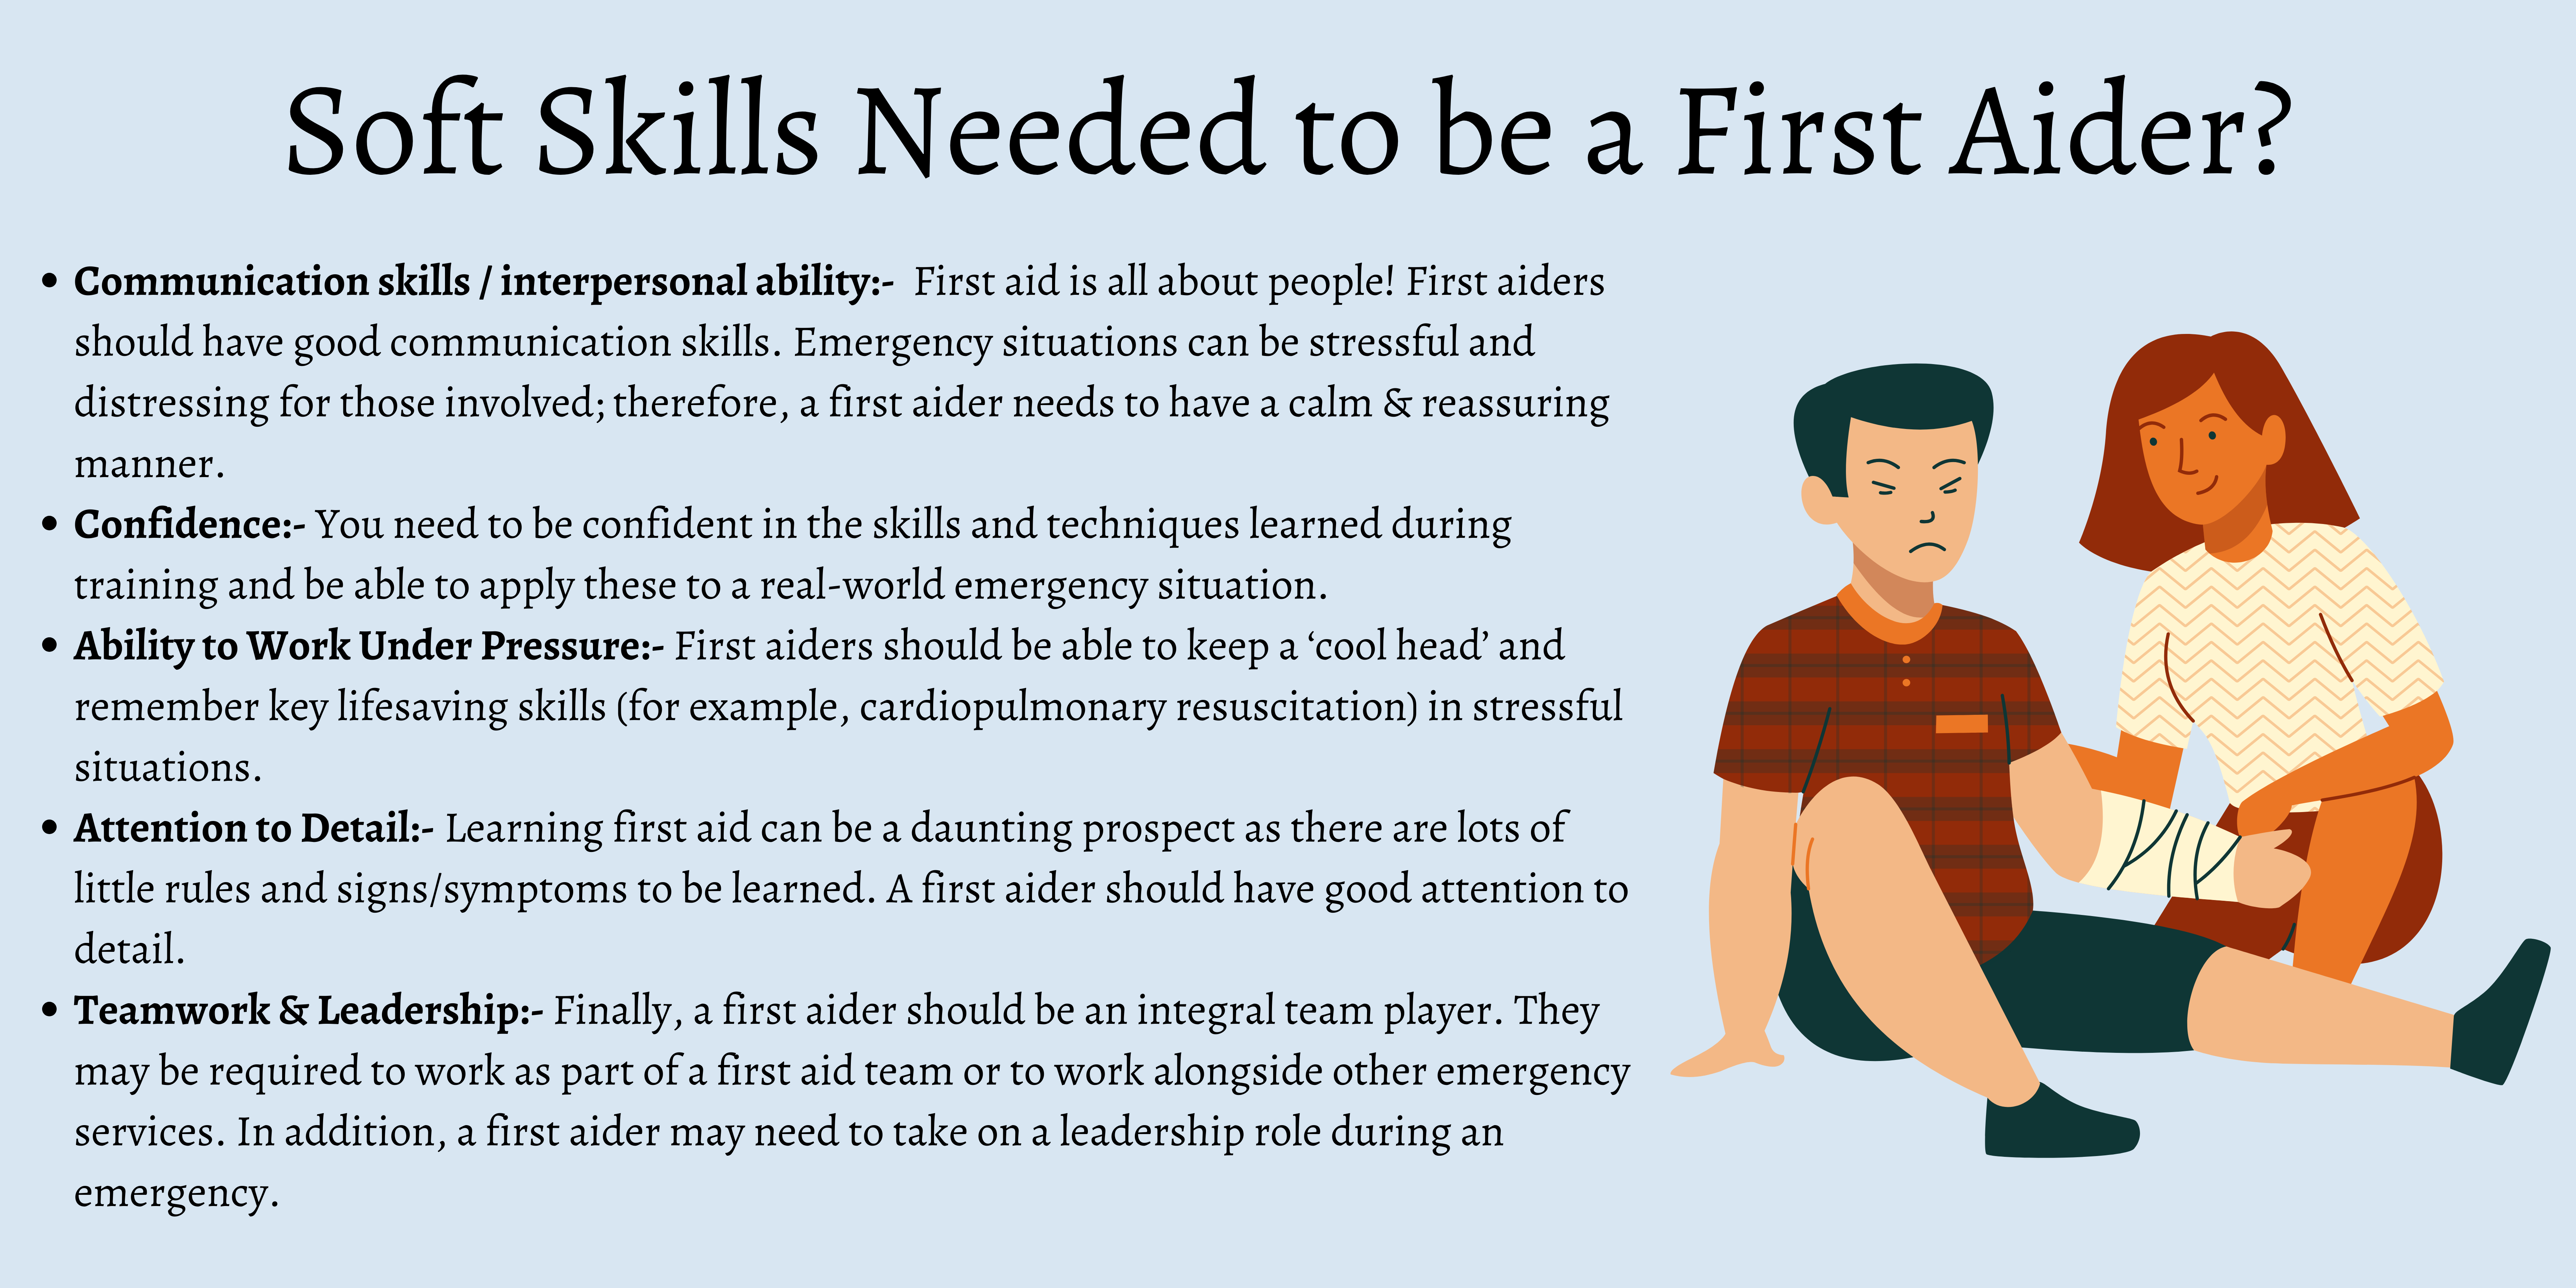 Most Americans not confident about first aid skills, 2019-01-24